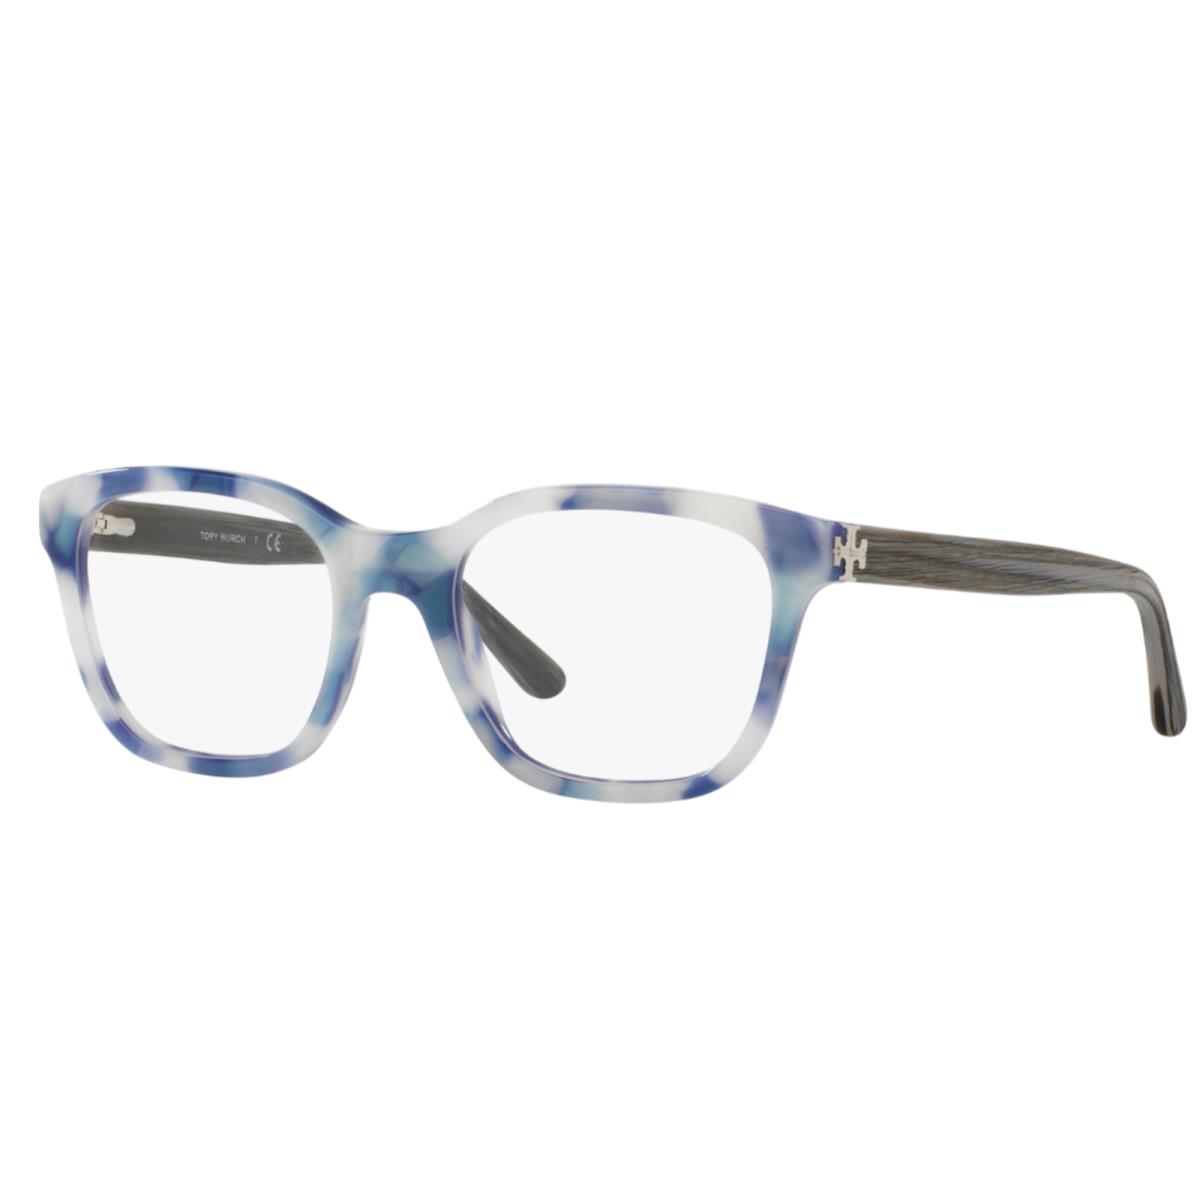 Tory Burch Rx-able Eyeglasses TY 2073 1652 52-19 Blue White Tortoise Frames - Blue Moonstone / Blue & White Tortoise Frame, Clear Demo with imprint Lens